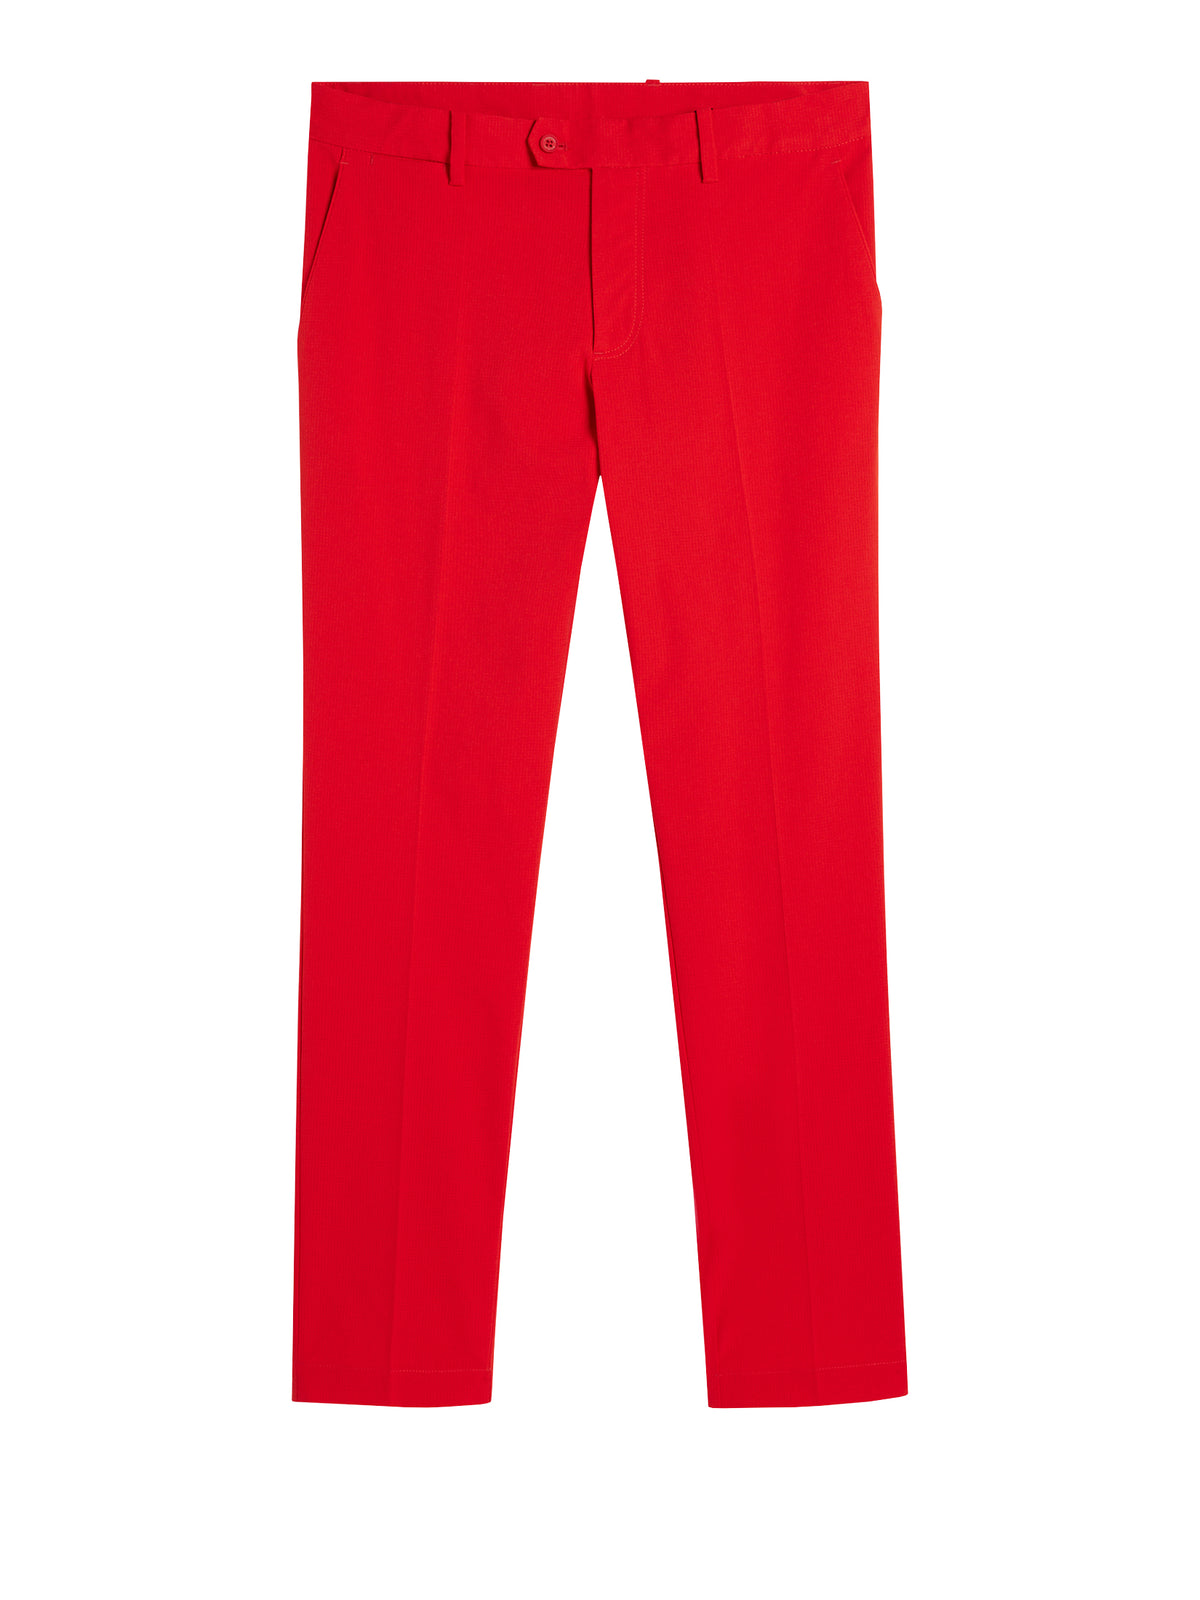 Vent Pant / Fiery Red